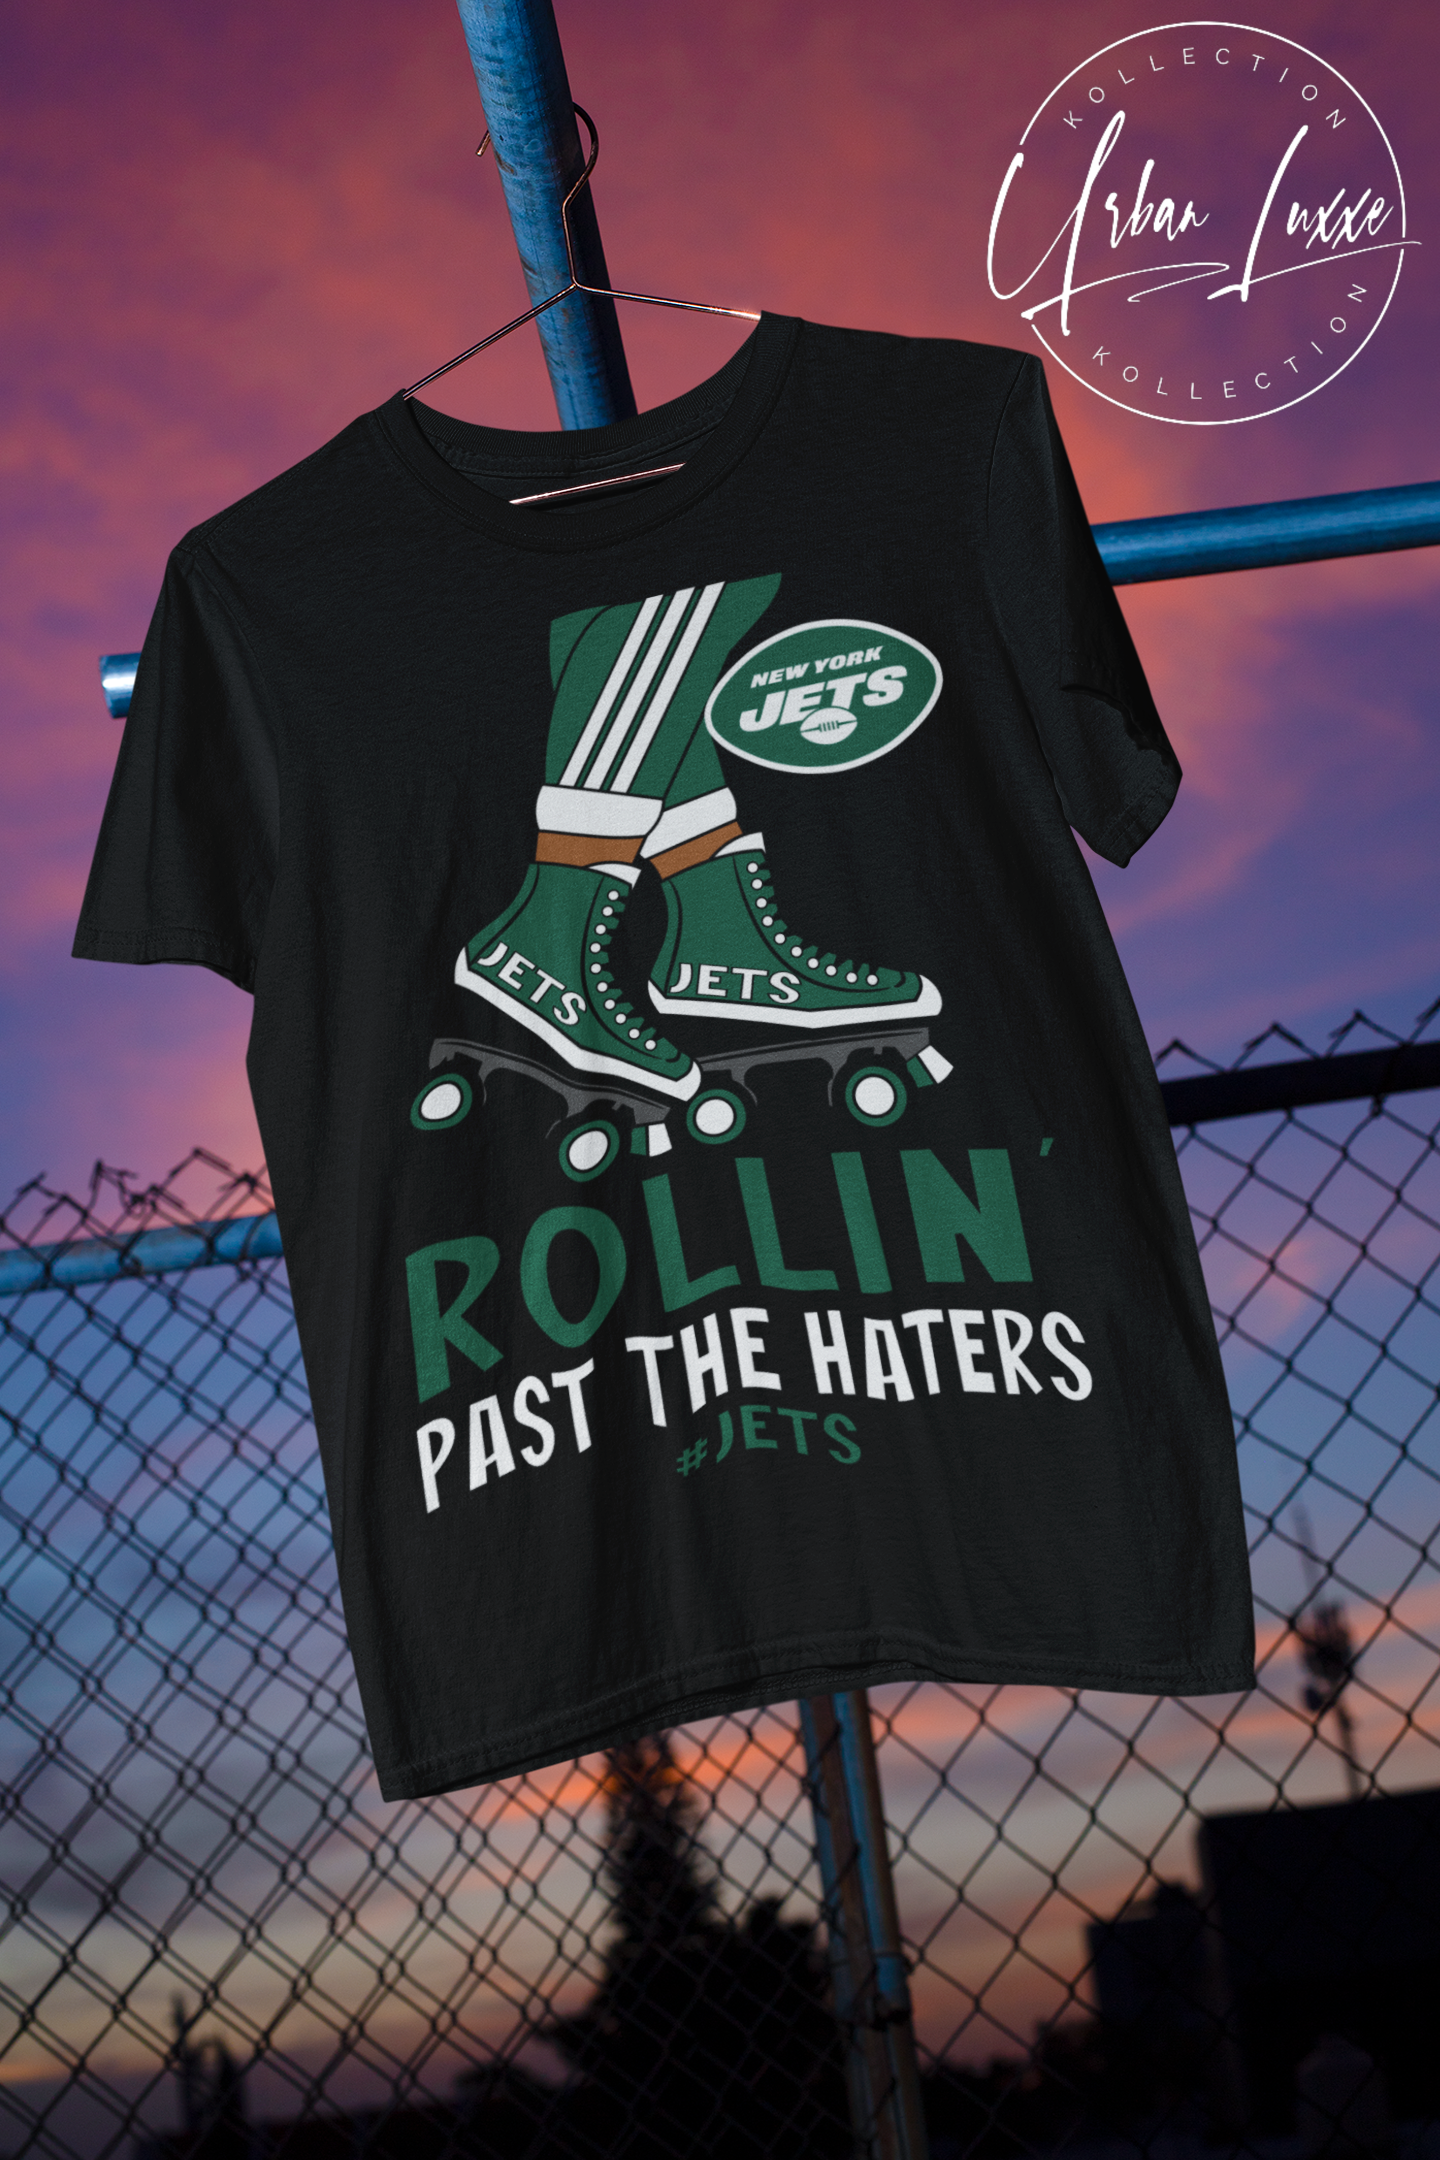 Rollin’ Past The Haters NY Jets T-shirt